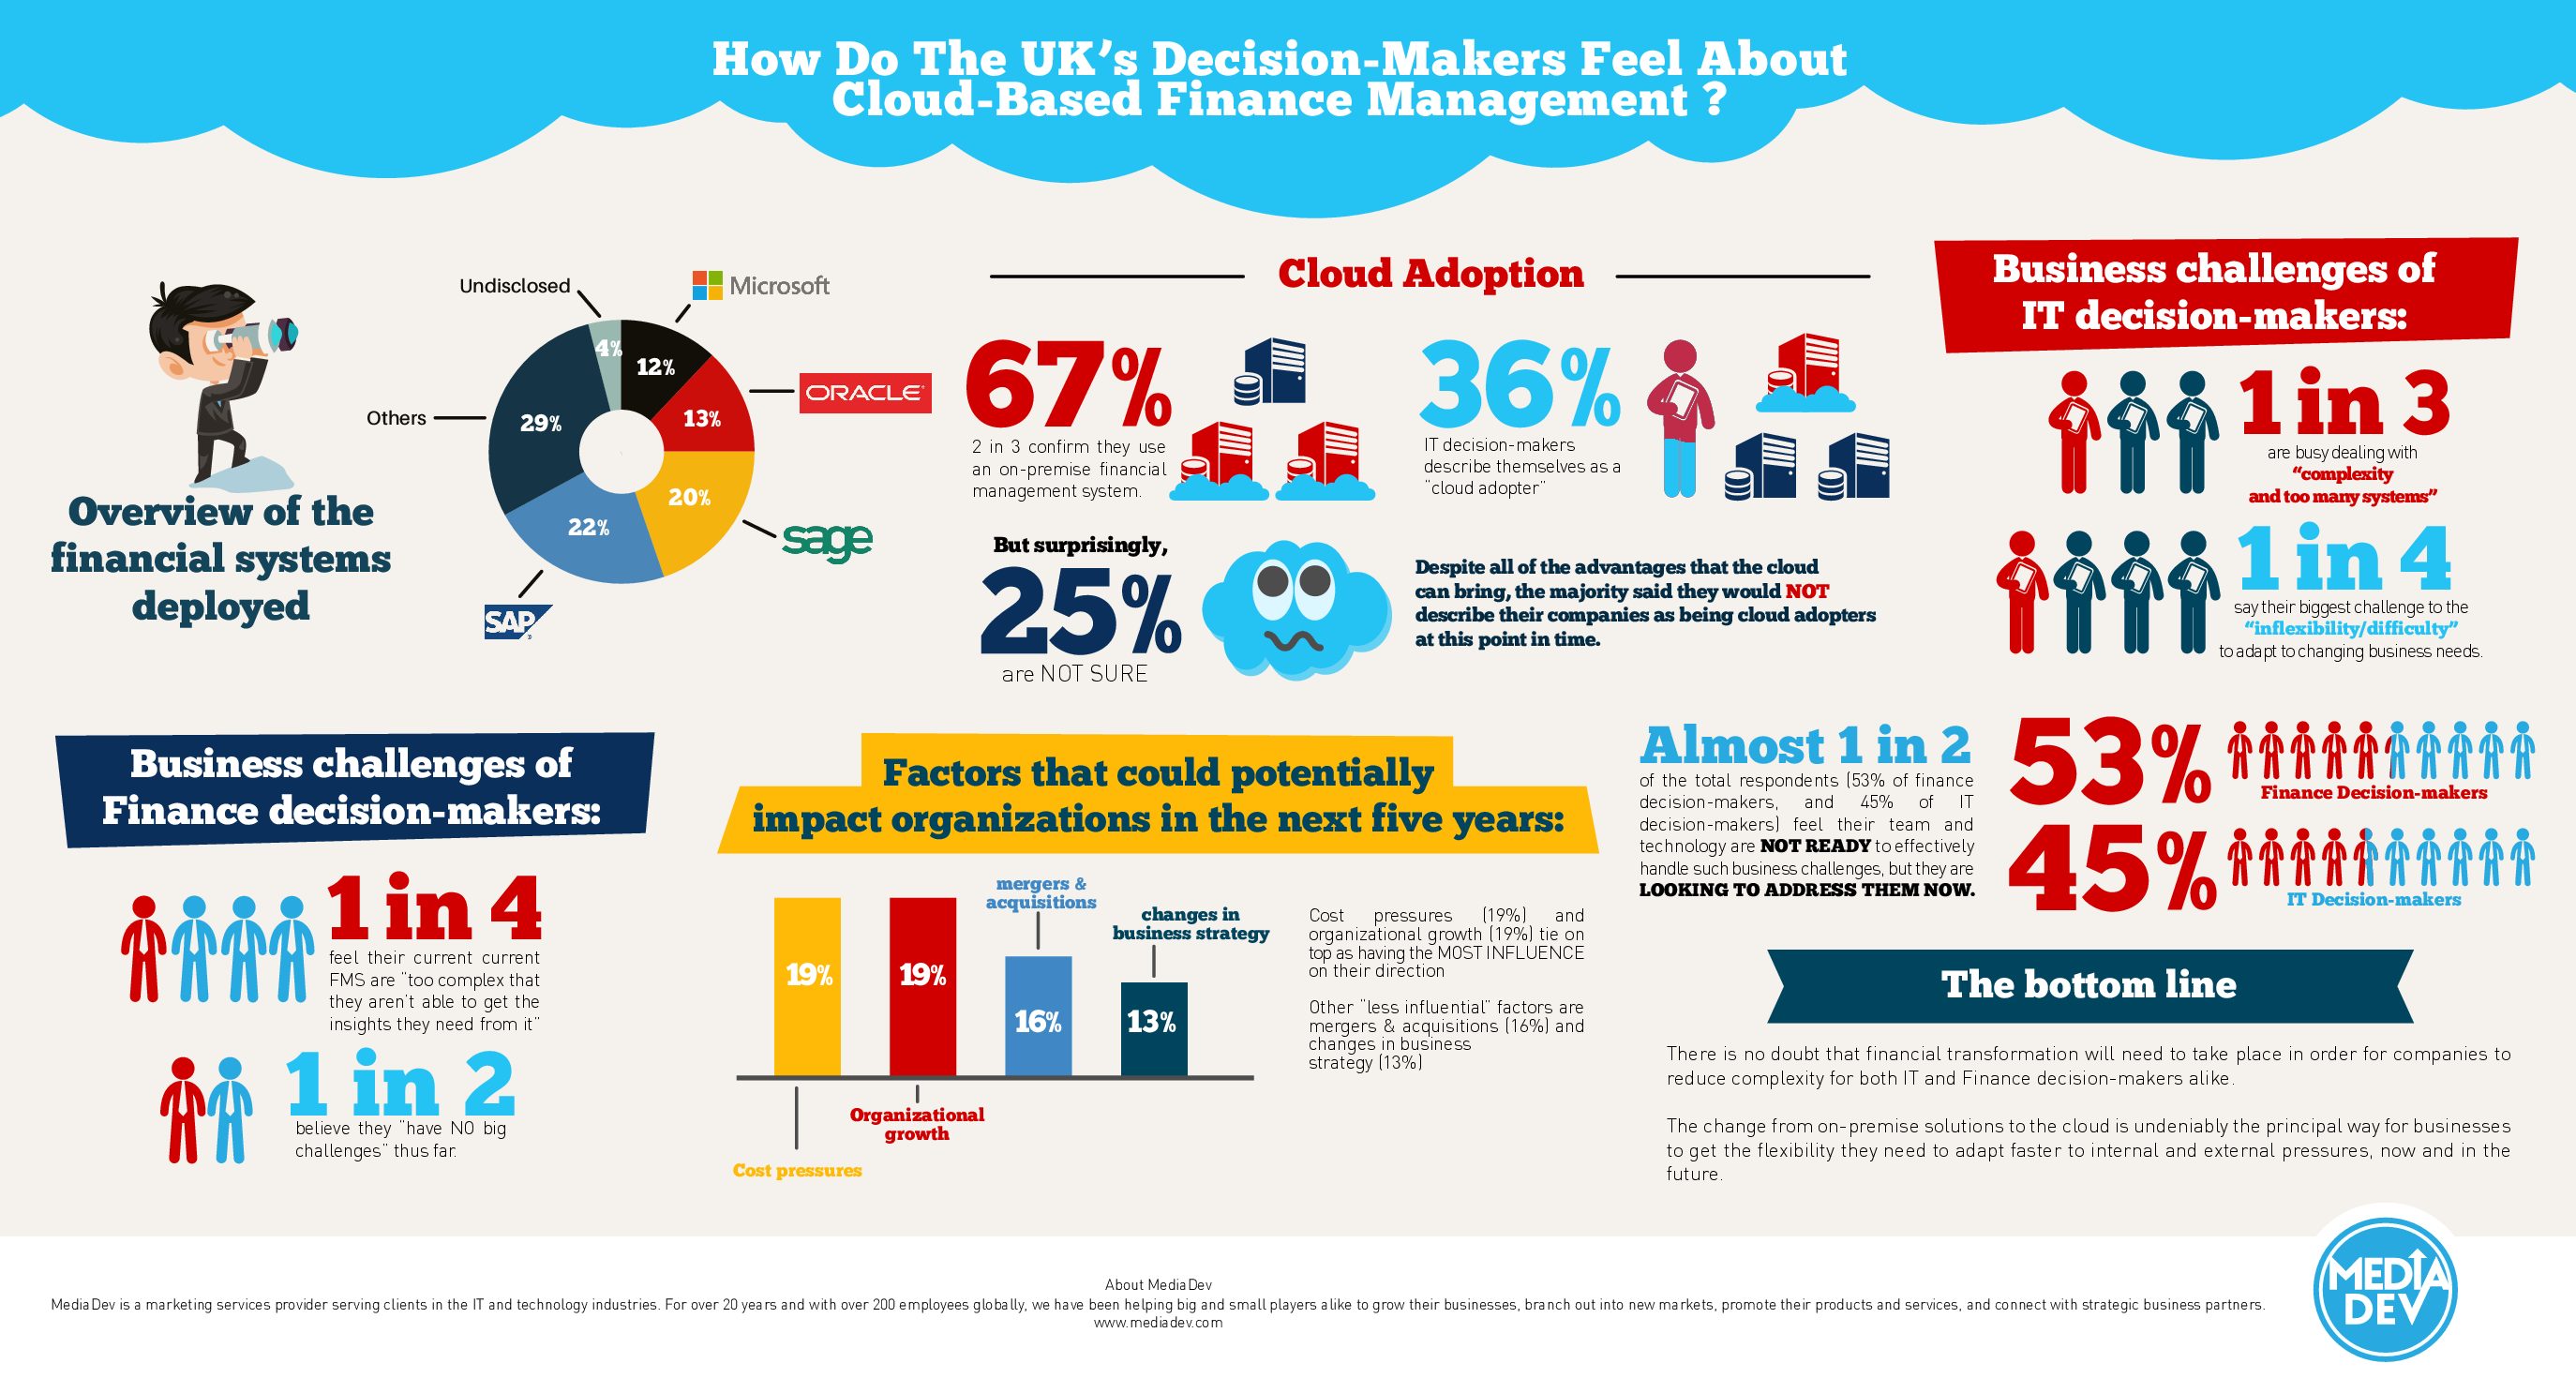 How UK Decision-Makers Feel About Cloud-Based Finance Management